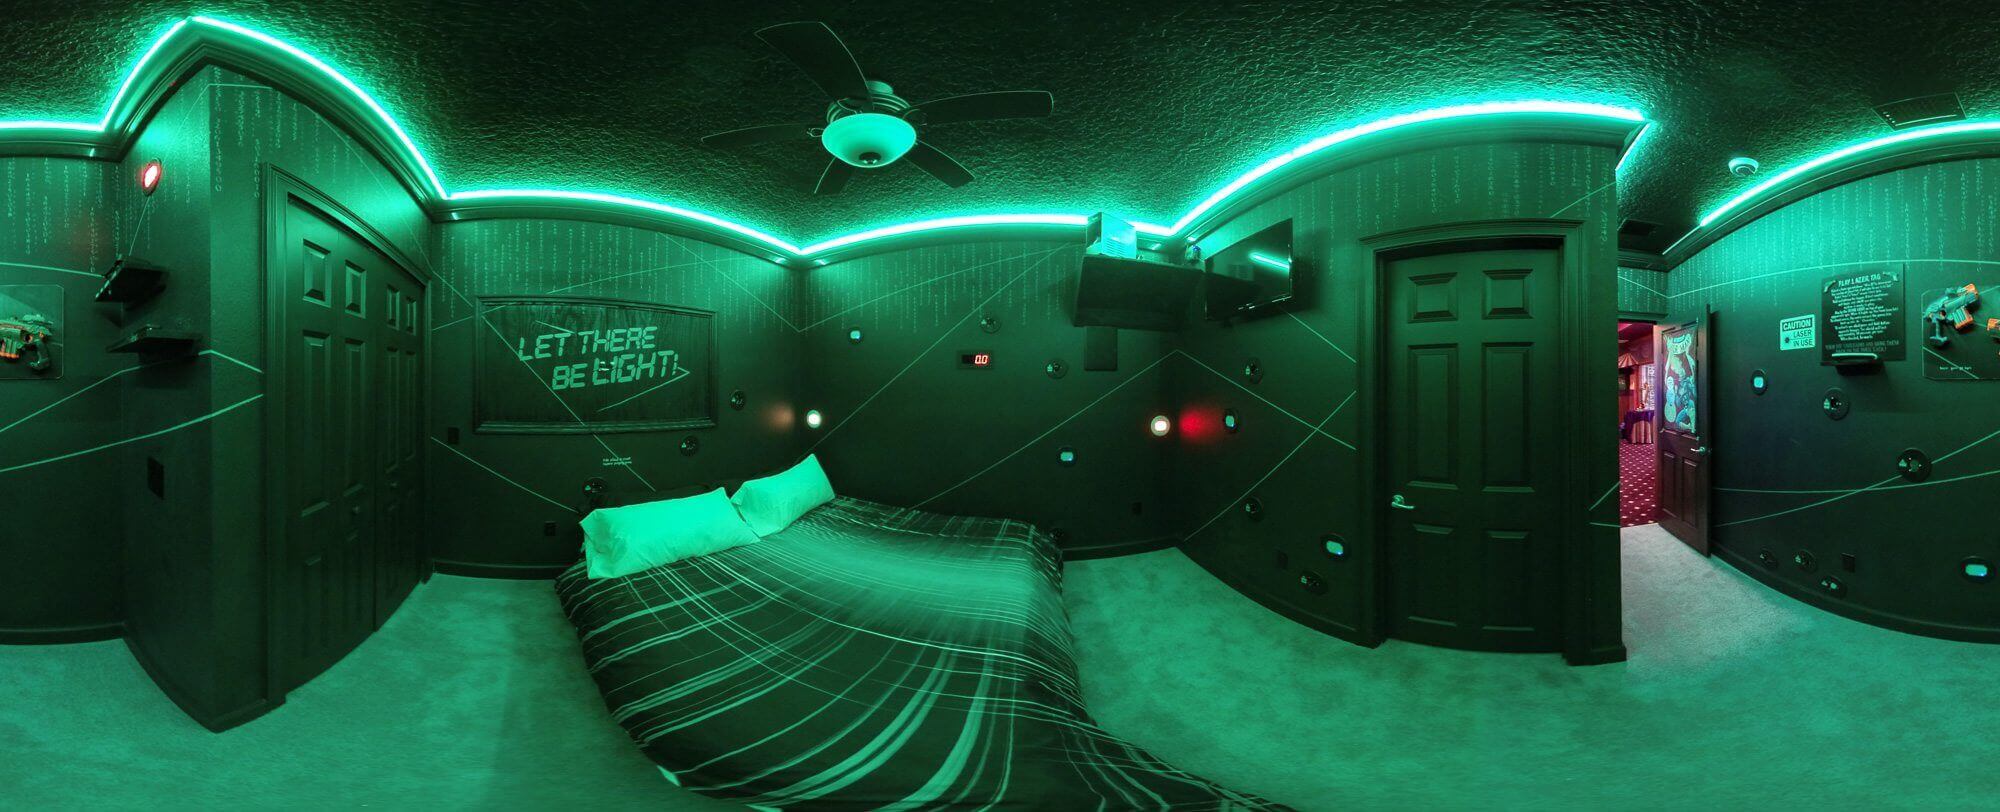 Vacation rental home for family reunions.... with laser tag - The Milky Way Galaxy Room at Sweet Escape House in Clermont FL